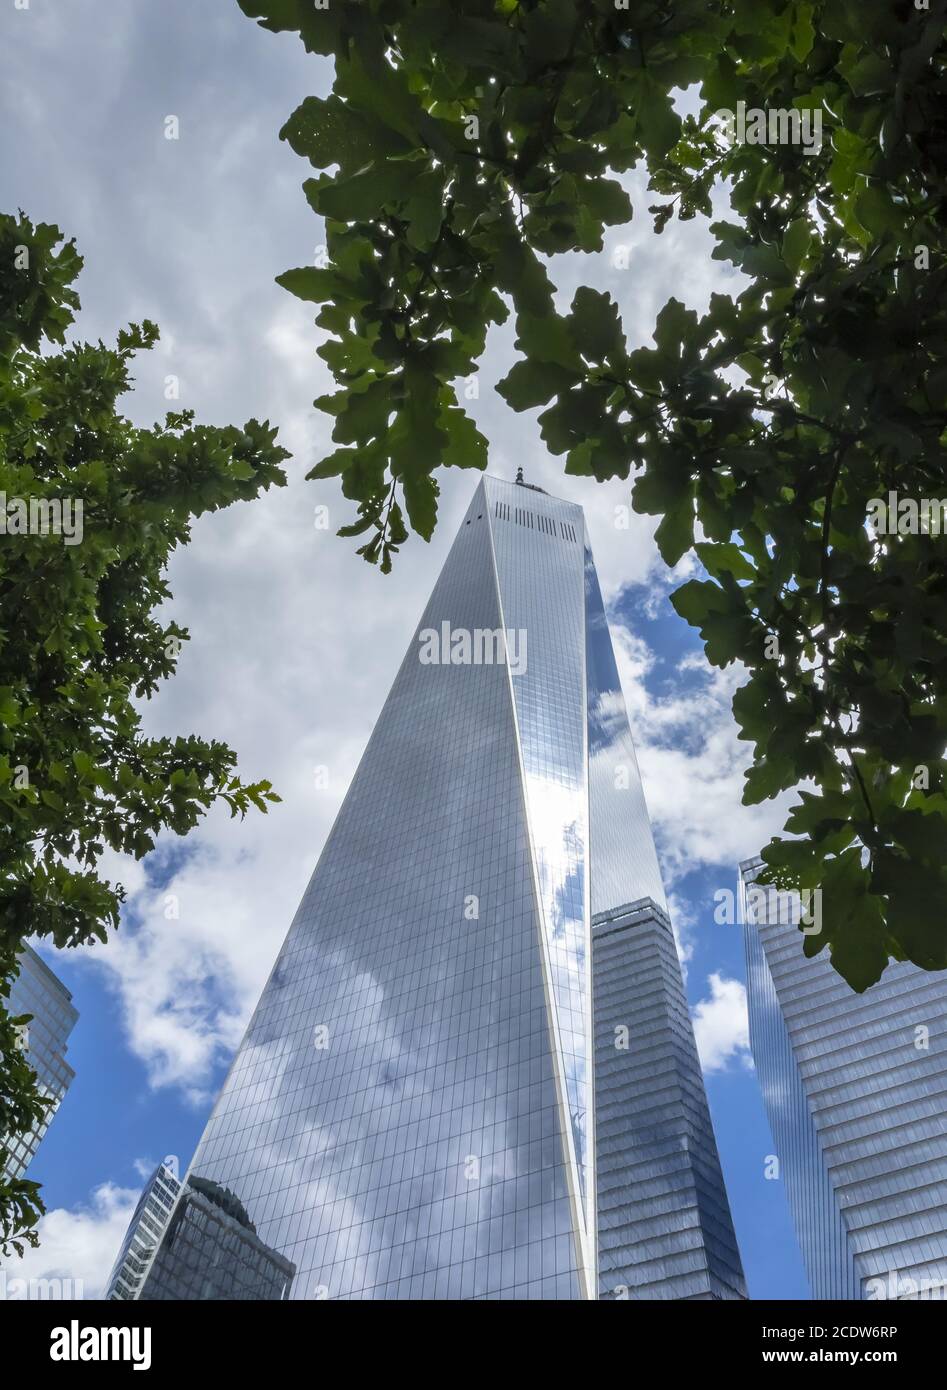 Views Of The Freedom Tower And World Trade Center Memorial In New York City Stock Photo